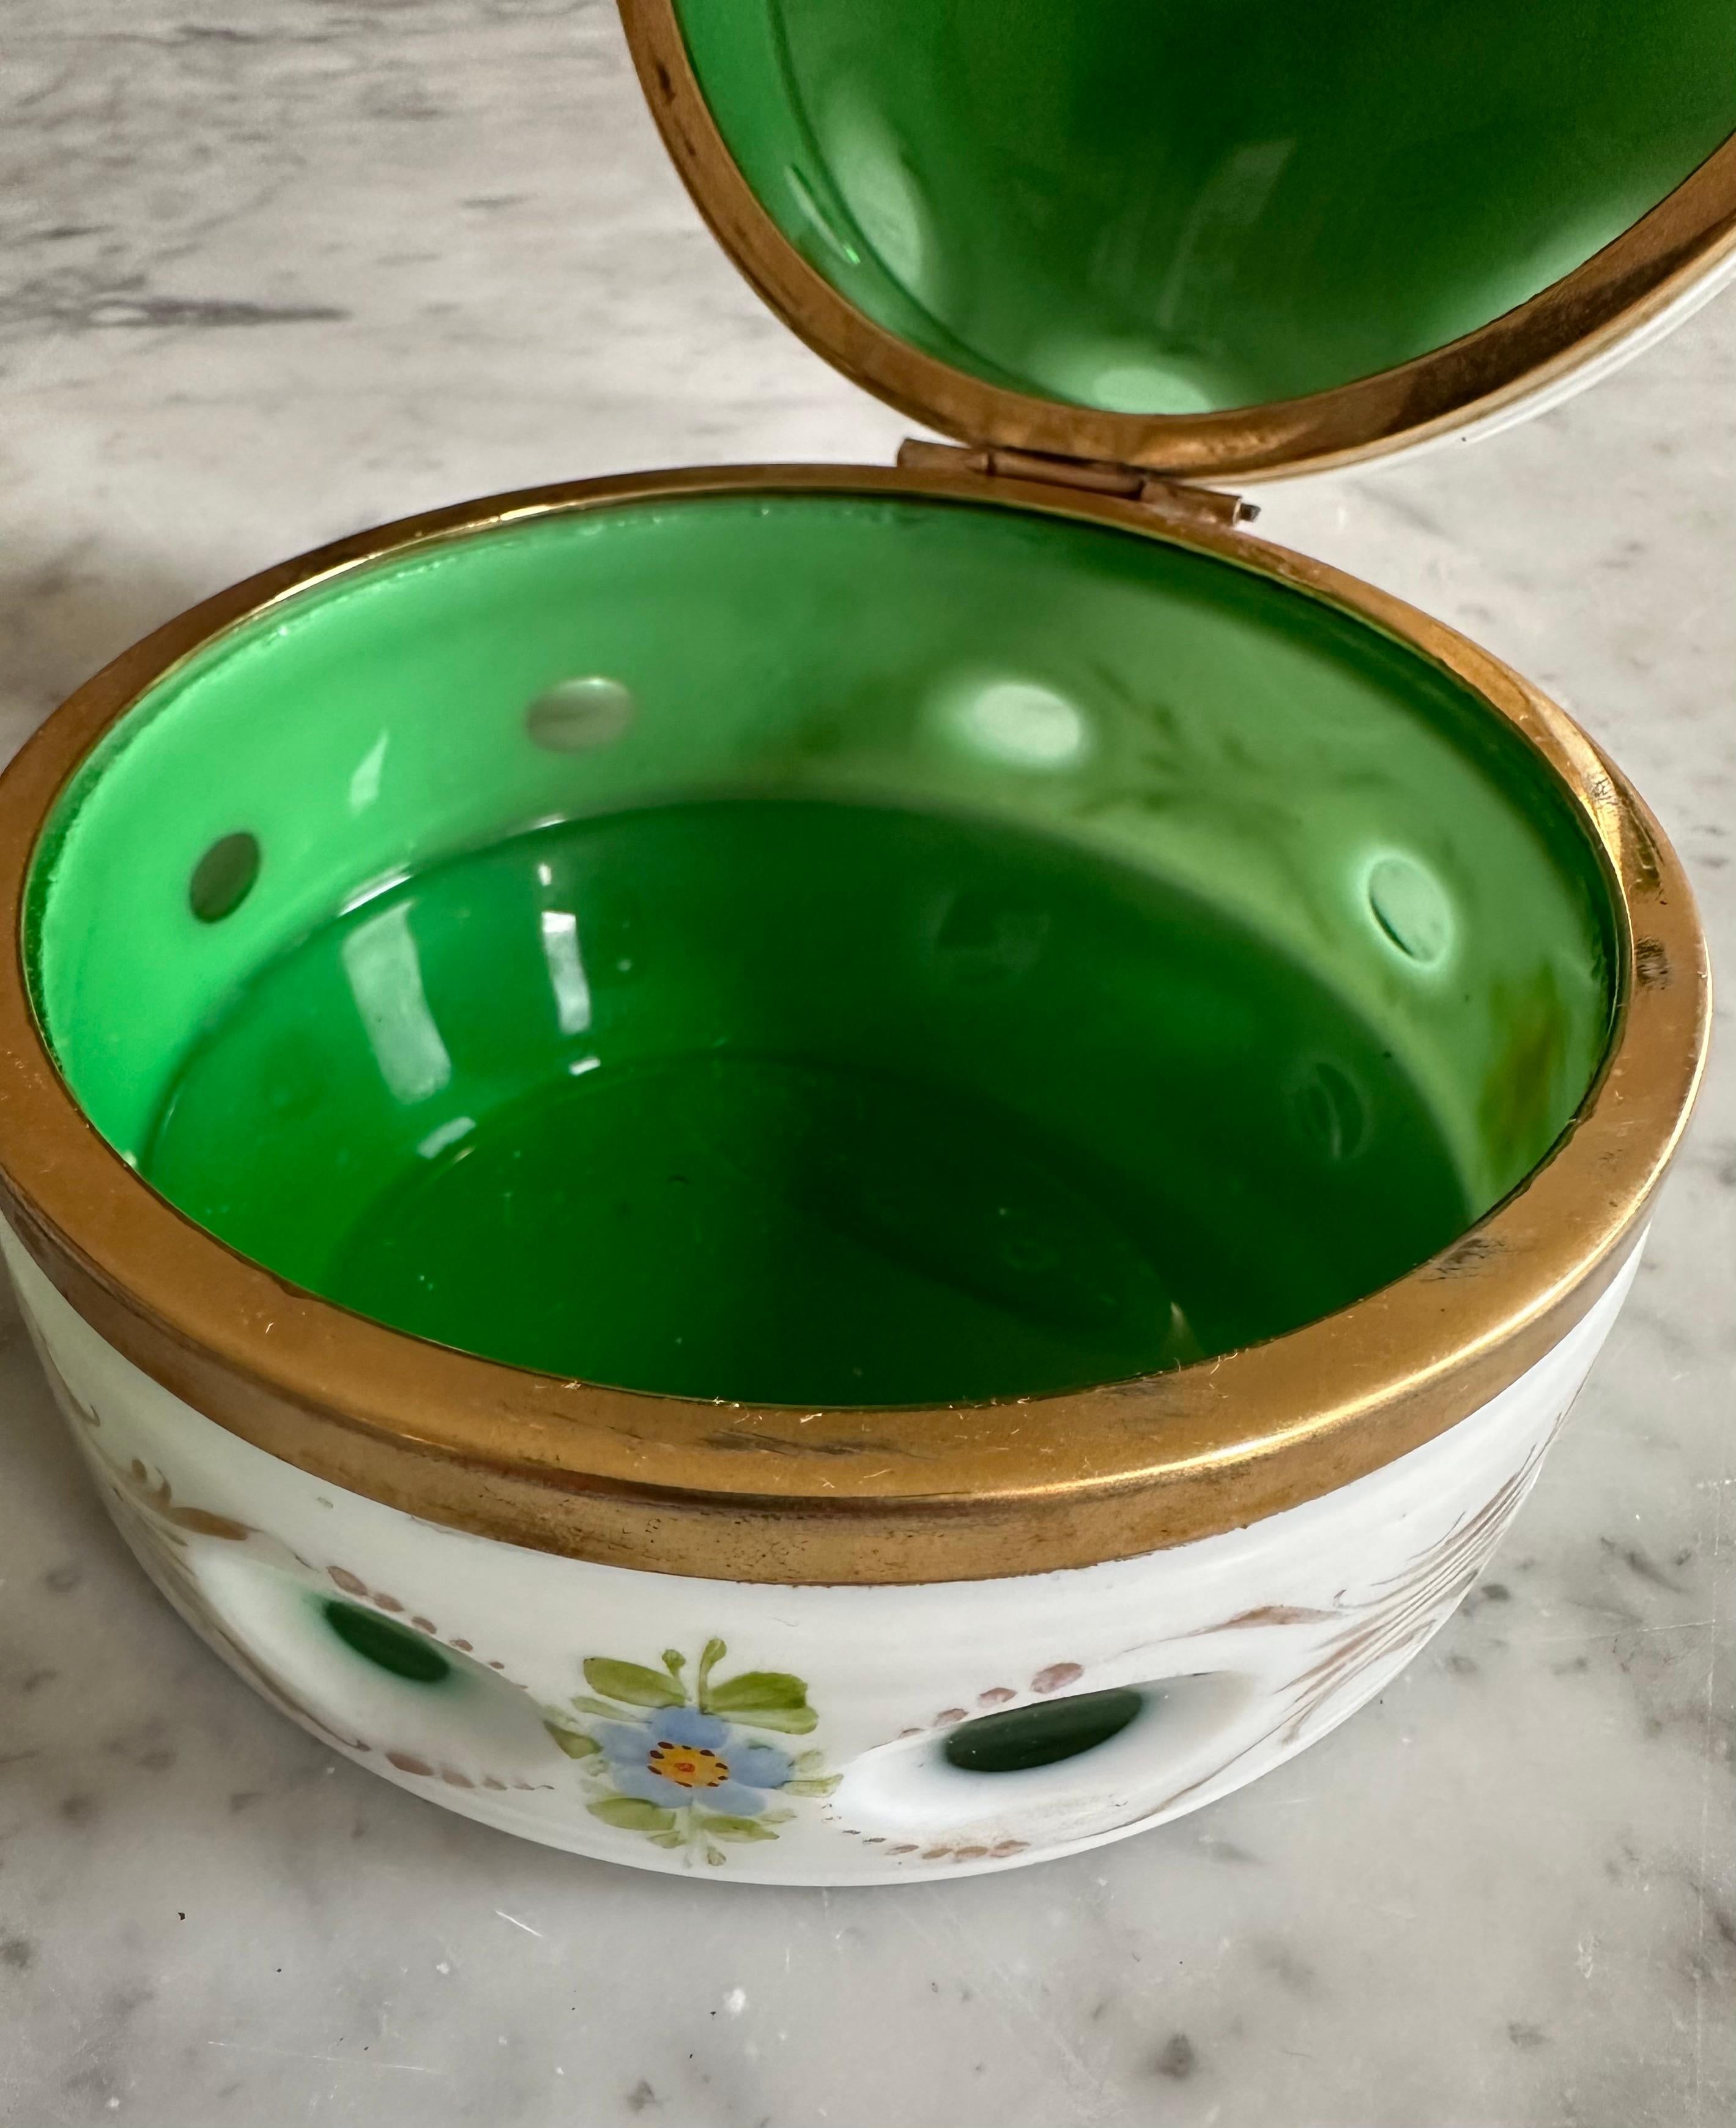 1890s Opaline Glass Lidded Box with Floral Ornament, white an green For Sale 6